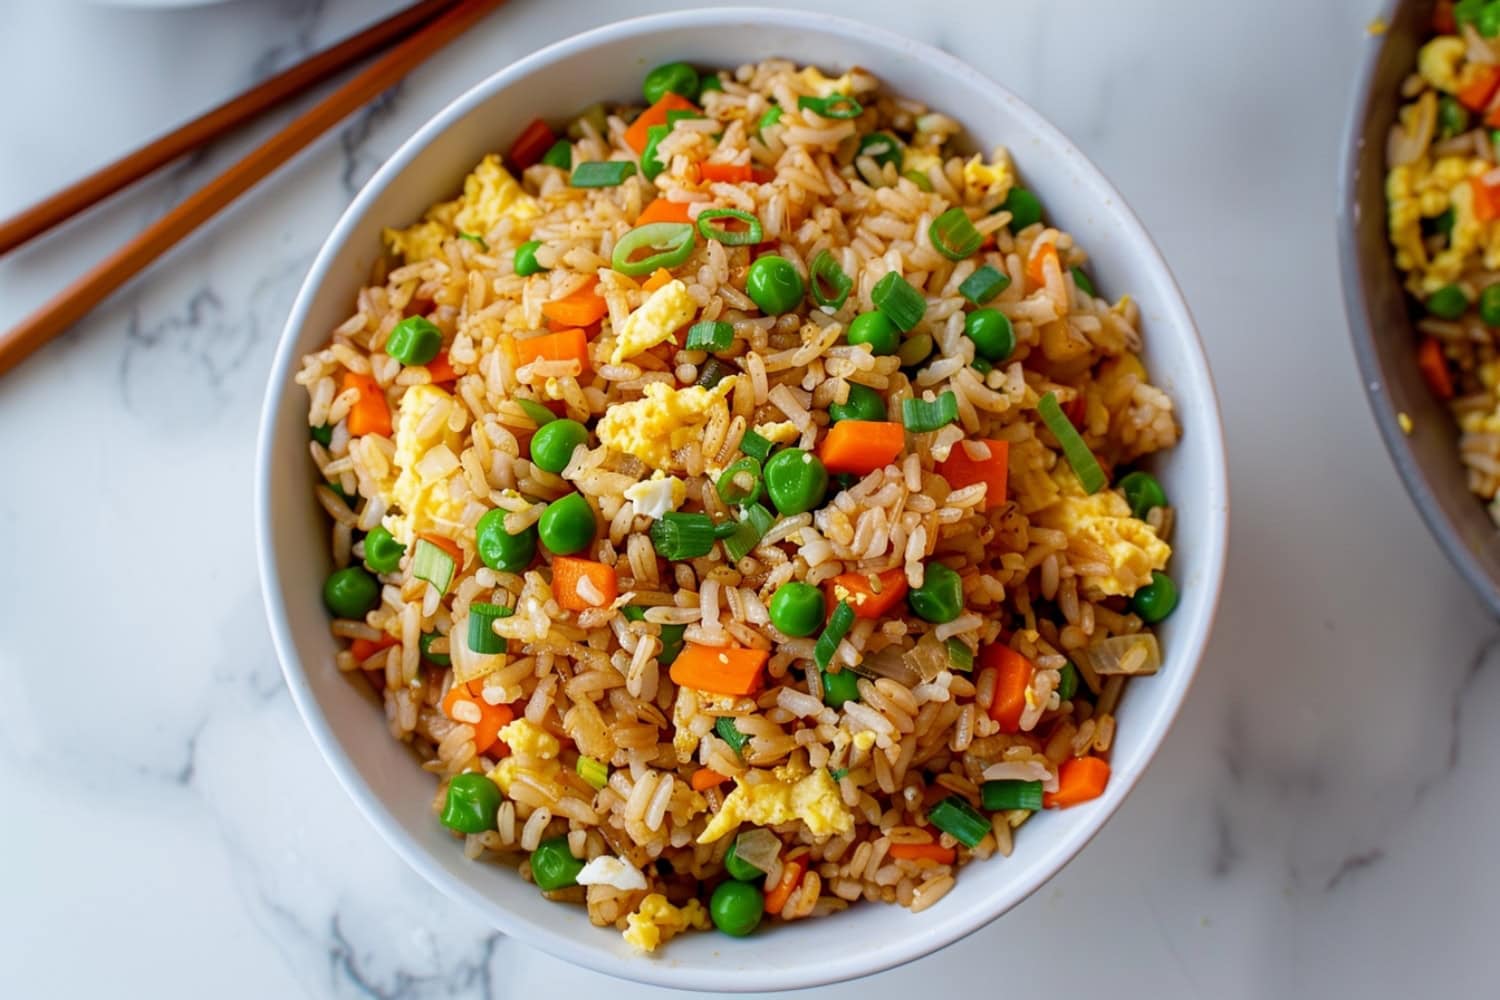 Mouthwatering hibachi fried rice filled with egg, green peas, carrots and green onions